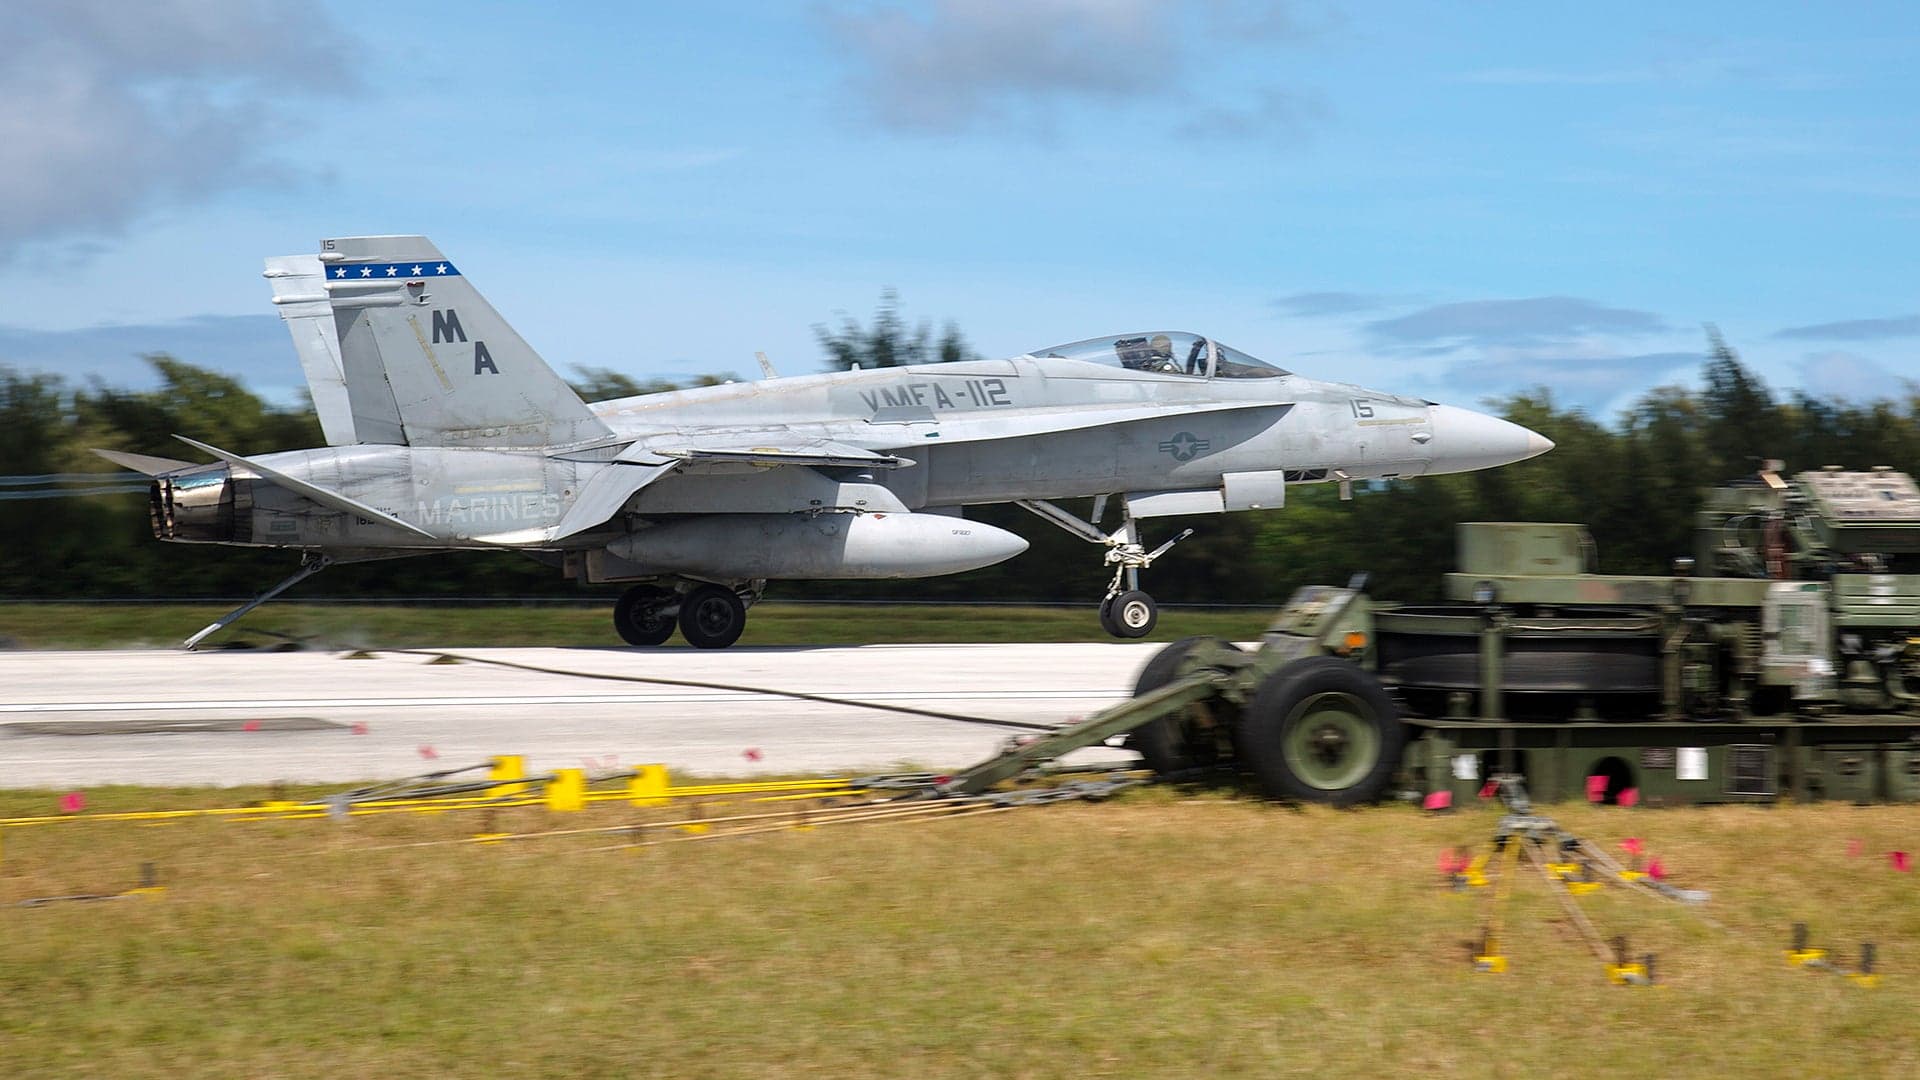 Air Force To Build Alternate Airbase On Tinian Island In Case Guam Gets Knocked Out